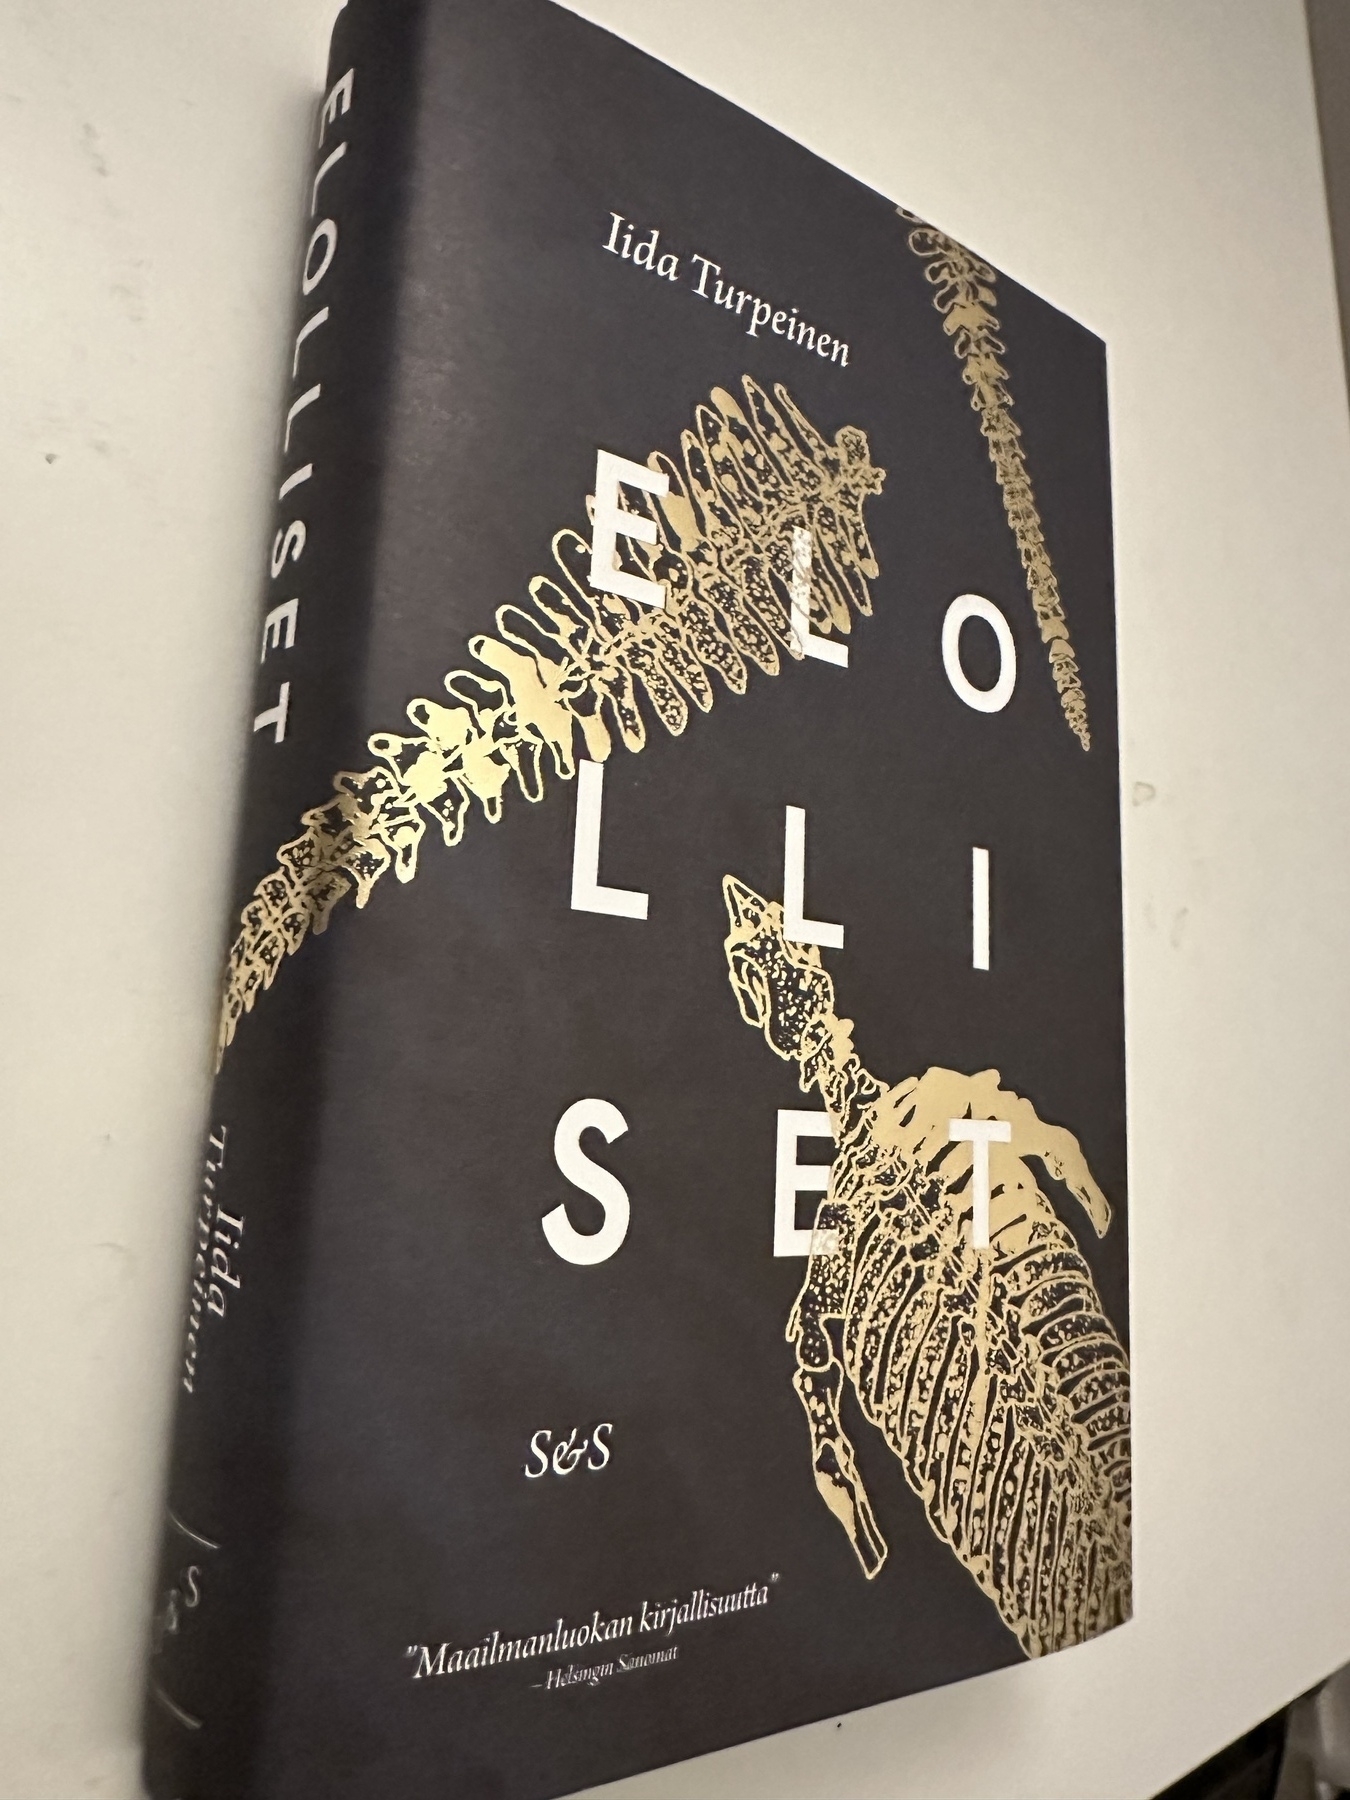 Hard book cover. It has the name of the author Iida Turpeinen and the book title Elolliset. On dark background there are two golden drawings of a skeleton of a Steller's sea cow